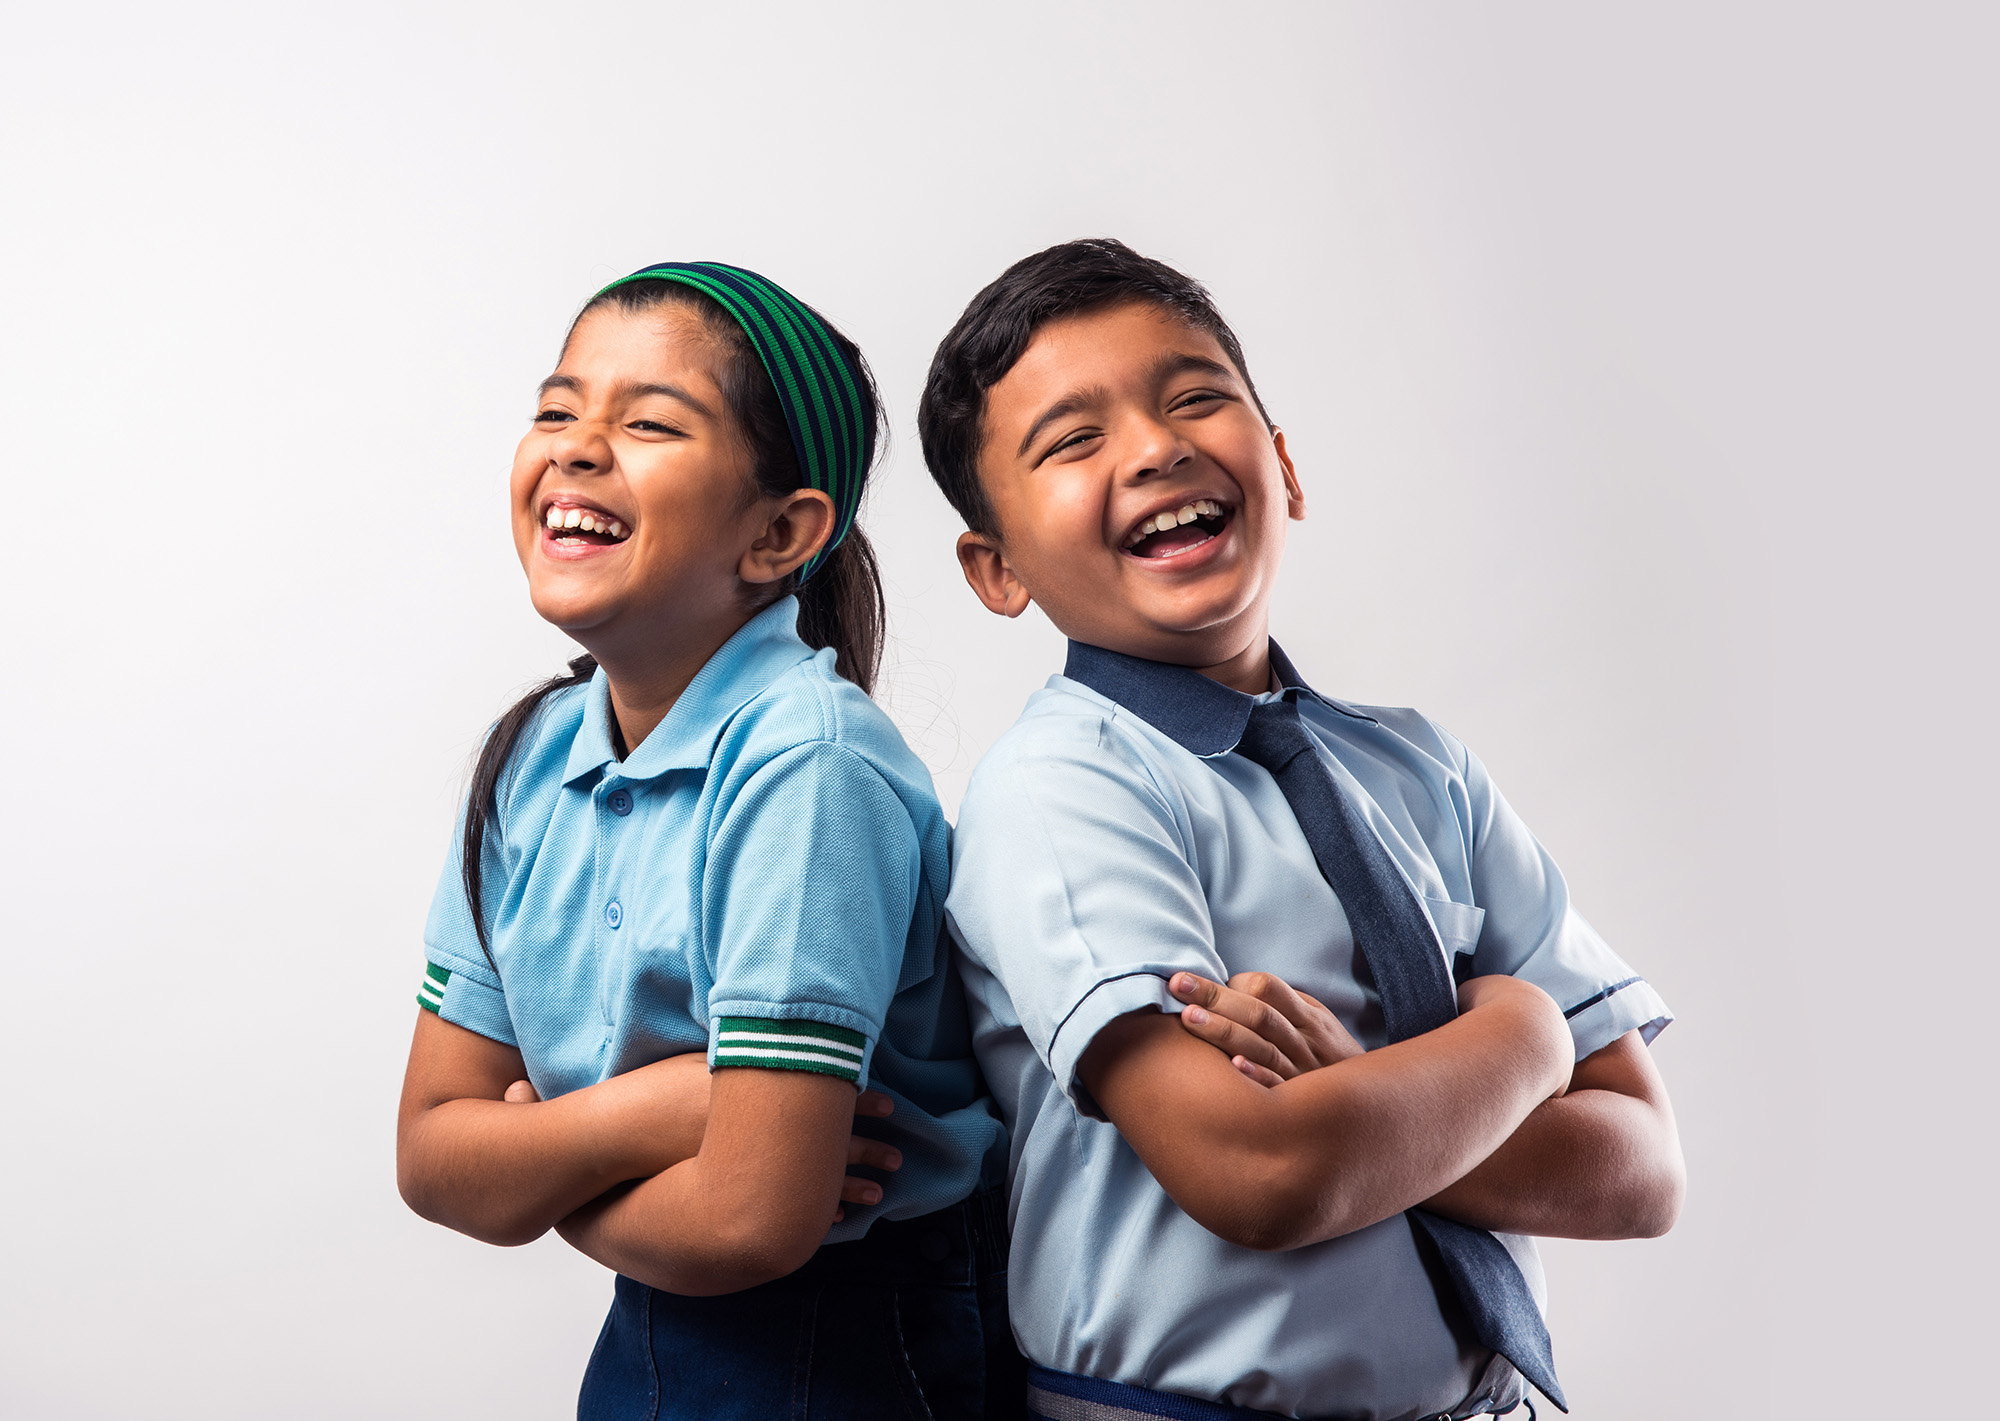 Young girl and boy students standing back to back smiling and laughing